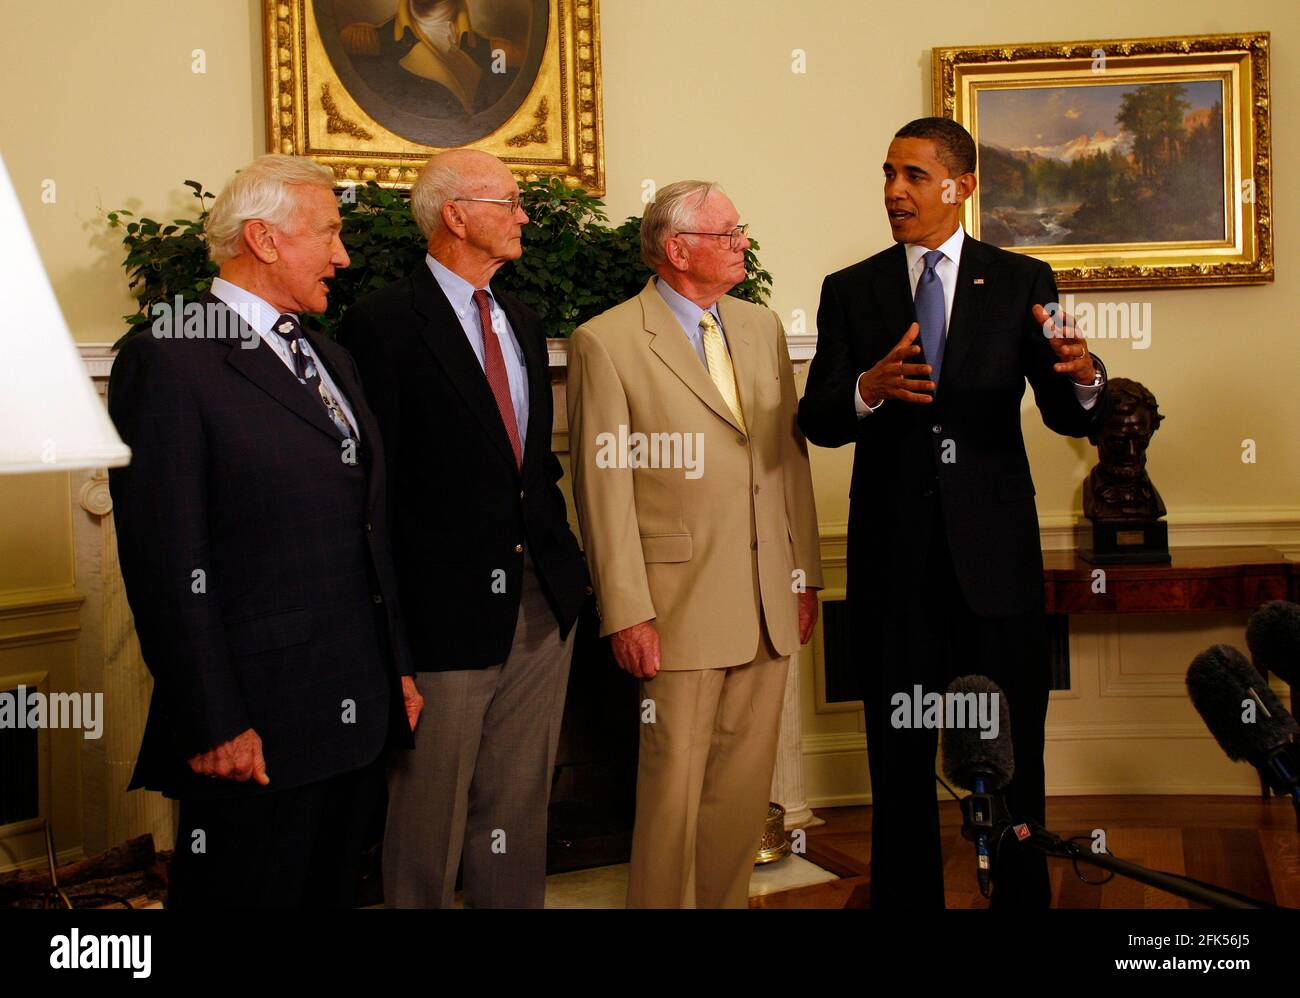 Washington, DC - July 20, 2009 -- United States President Barack Obama meets with Apollo 11 crew members (l-r) Edwin Eugene "Buzz" Aldrin, Jr., Michael Collins, and Neil Armstrong in the Oval Office of the White House on the 40th anniversary of the astronauts' lunar landing, Washington, DC, Monday, July 20, 2009. Credit: Martin H. Simon/Pool via CNP /MediaPunch Stock Photo